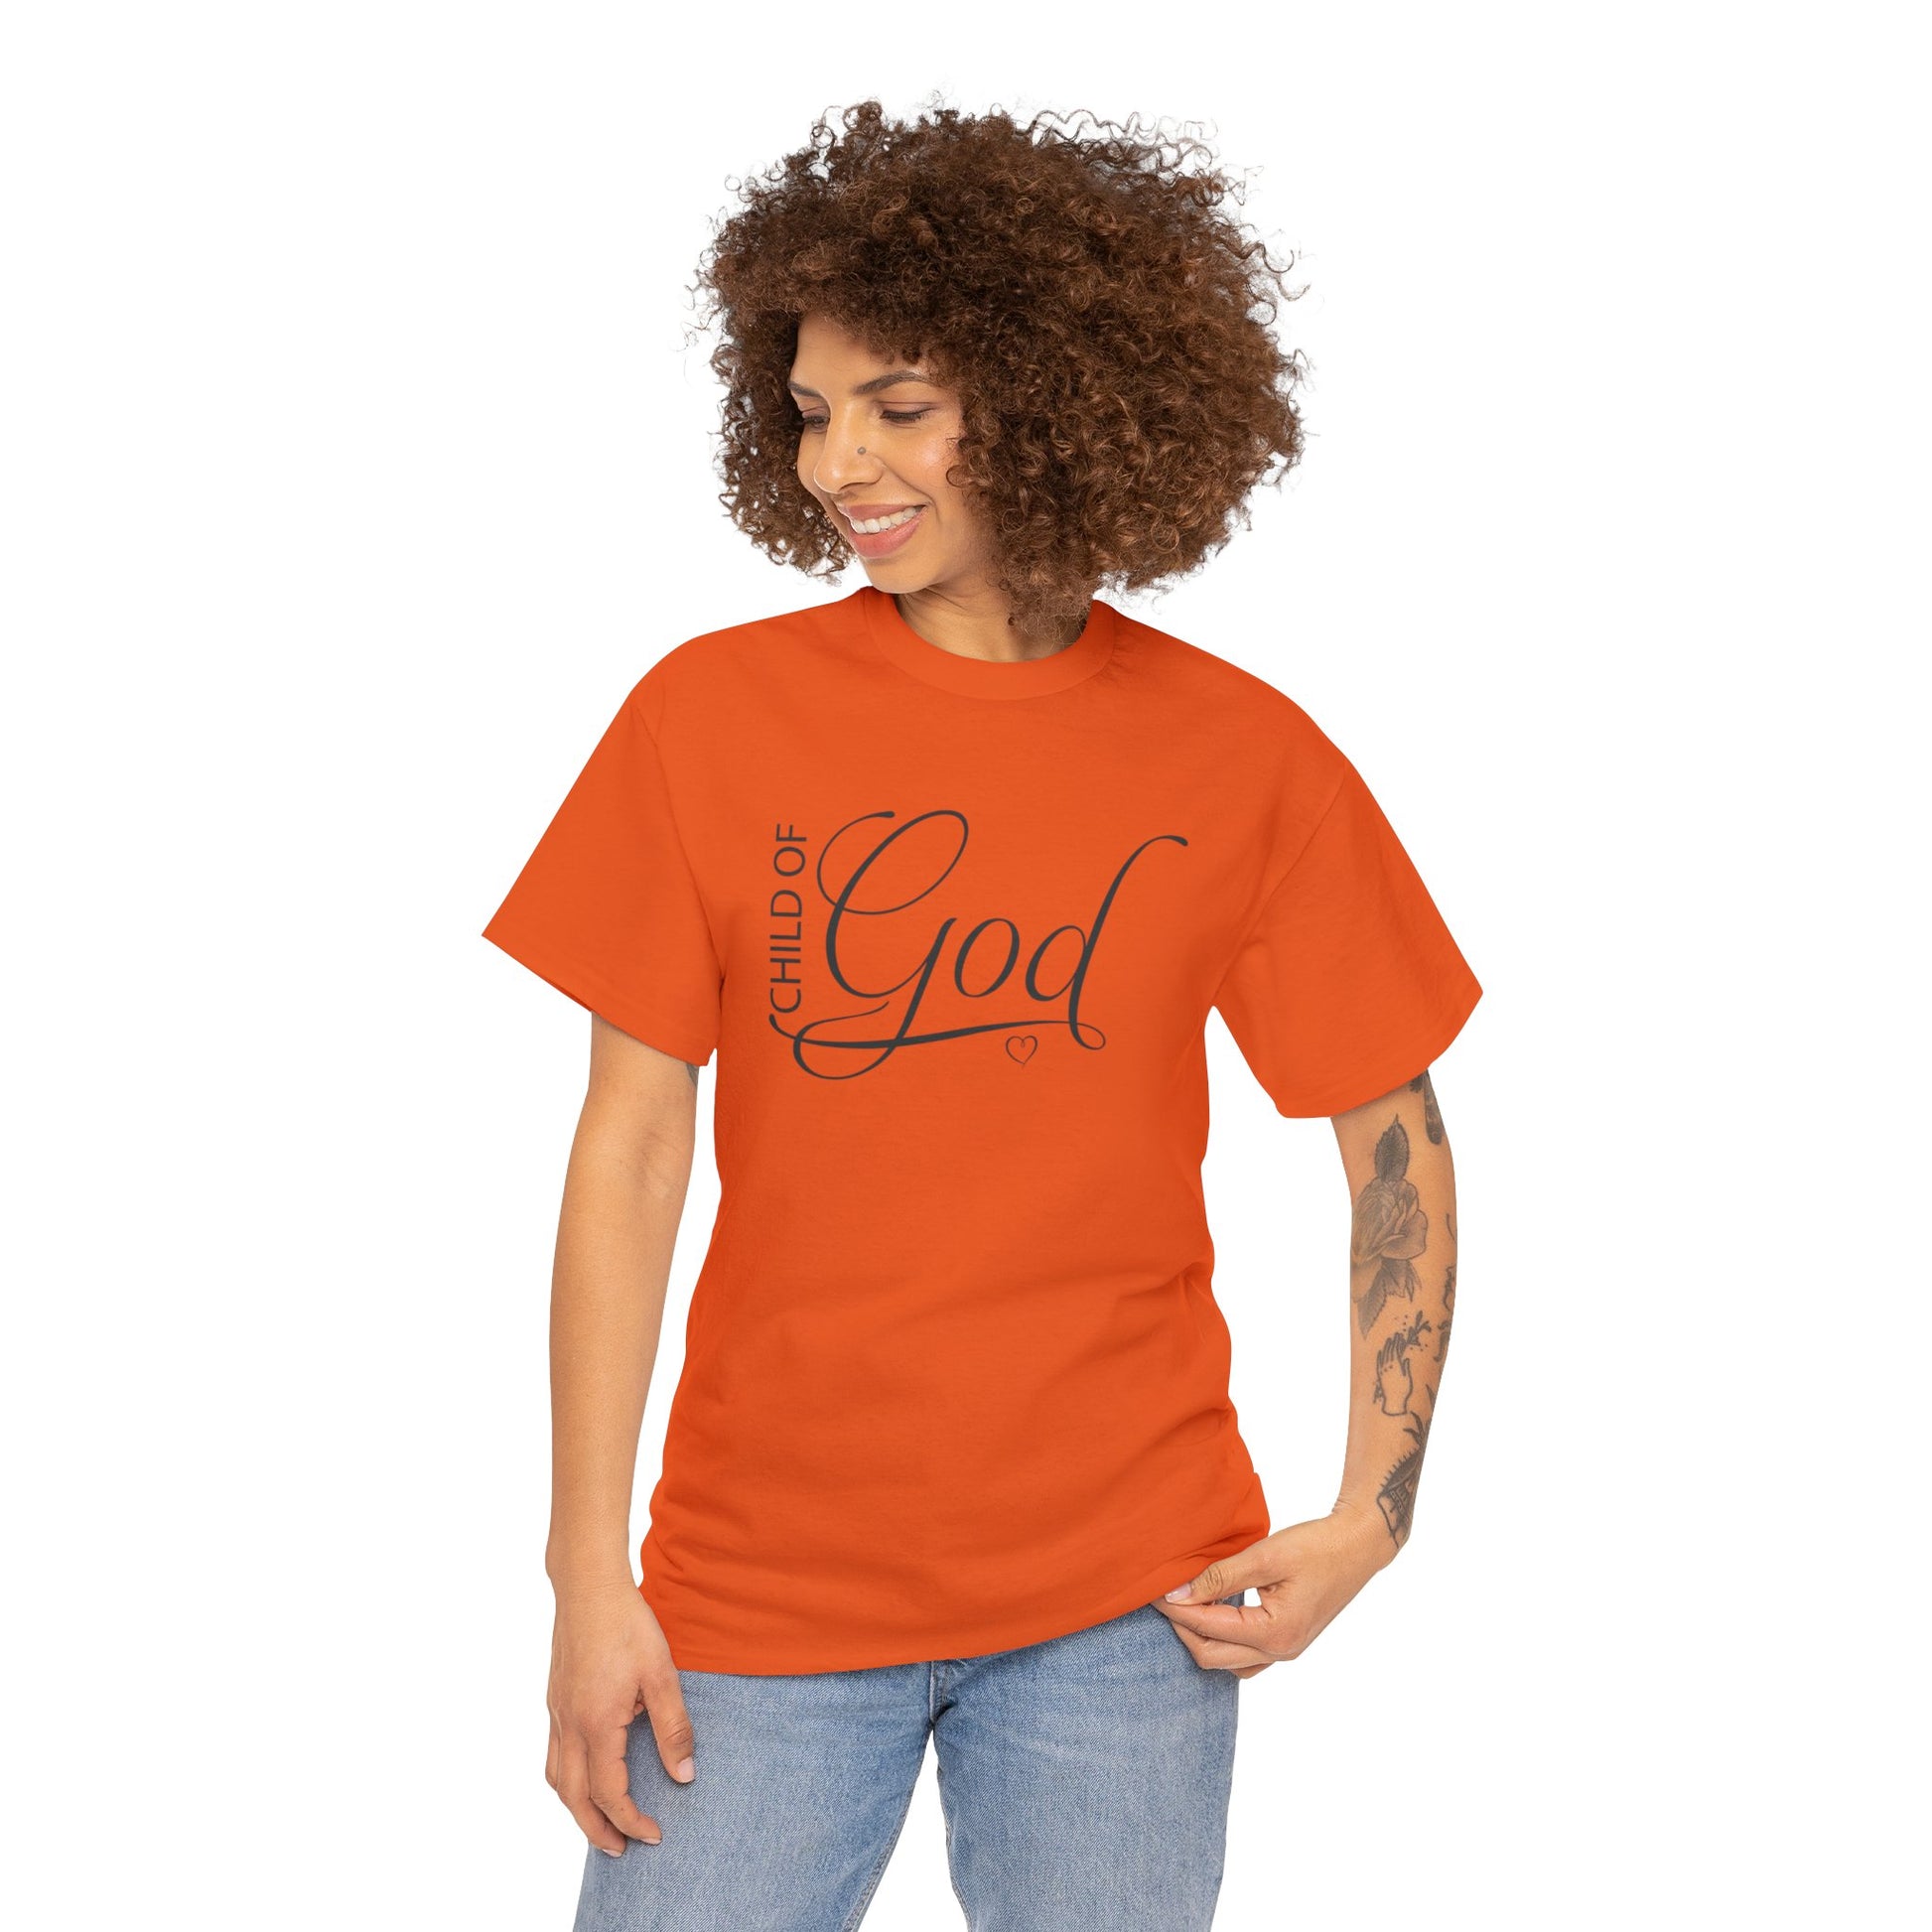 "Child Of God" T-Shirt - Weave Got Gifts - Unique Gifts You Won’t Find Anywhere Else!